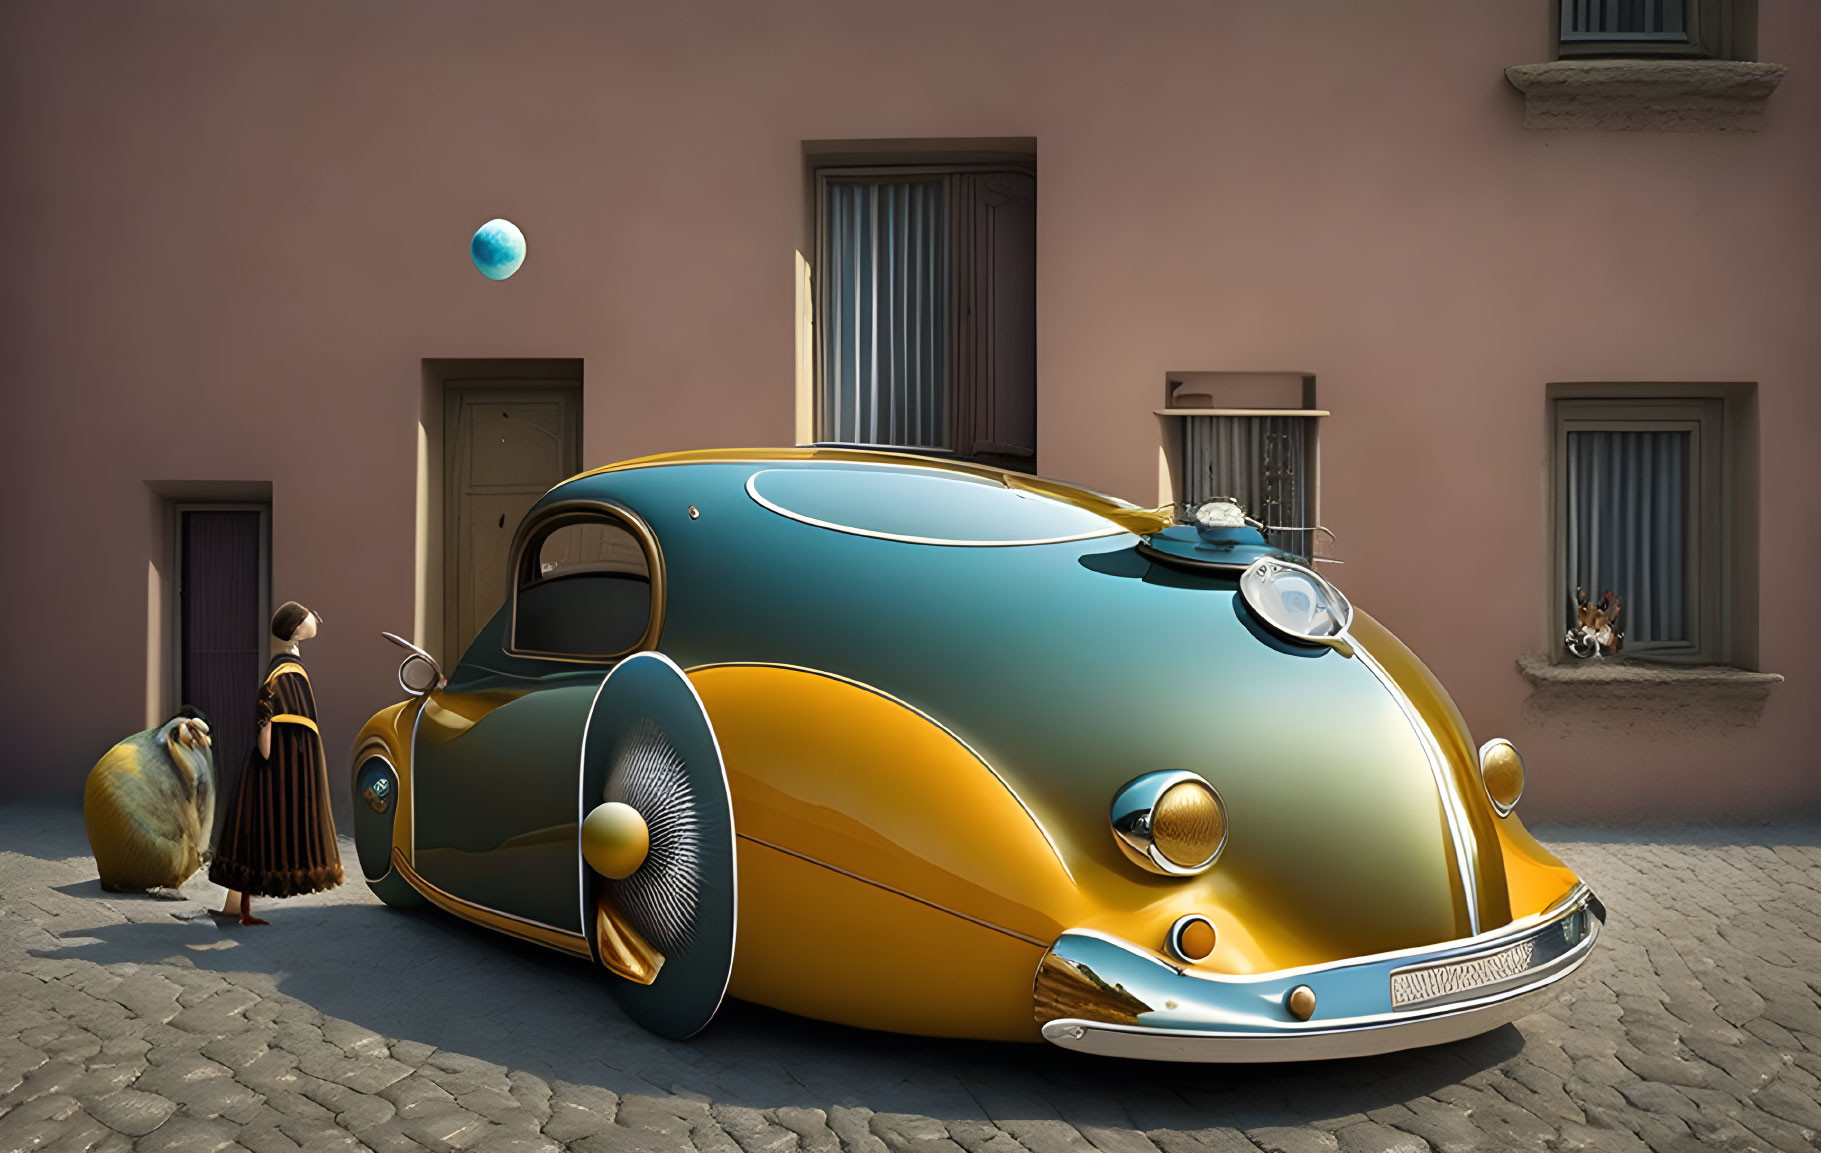 Surreal image: Oversized snail shell car, vintage woman, small bear, blue orb